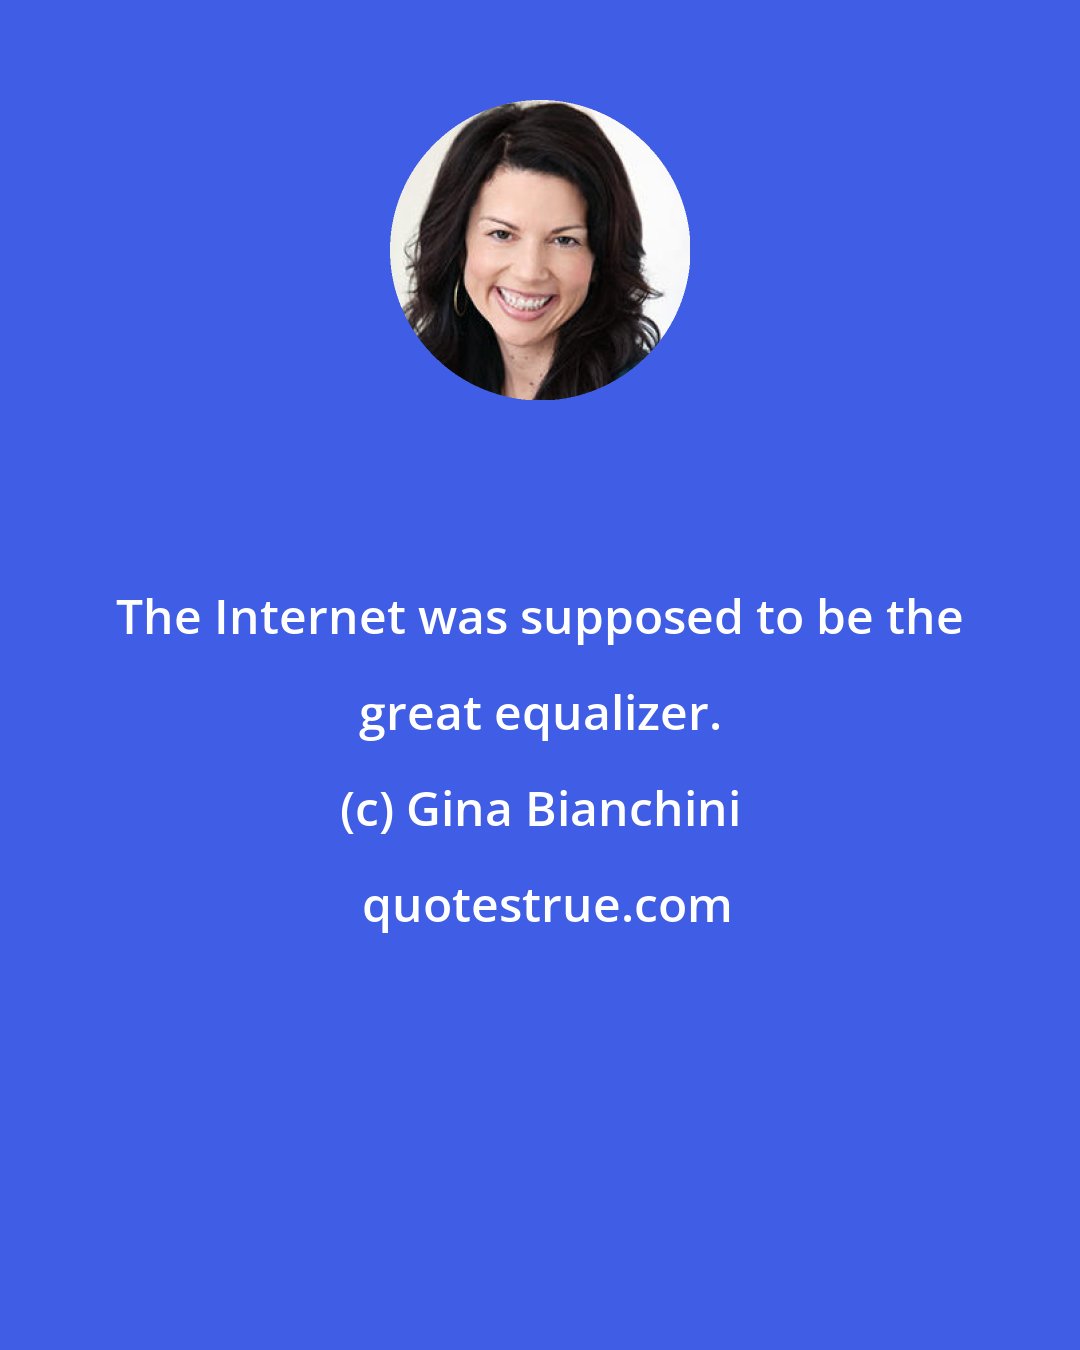 Gina Bianchini: The Internet was supposed to be the great equalizer.